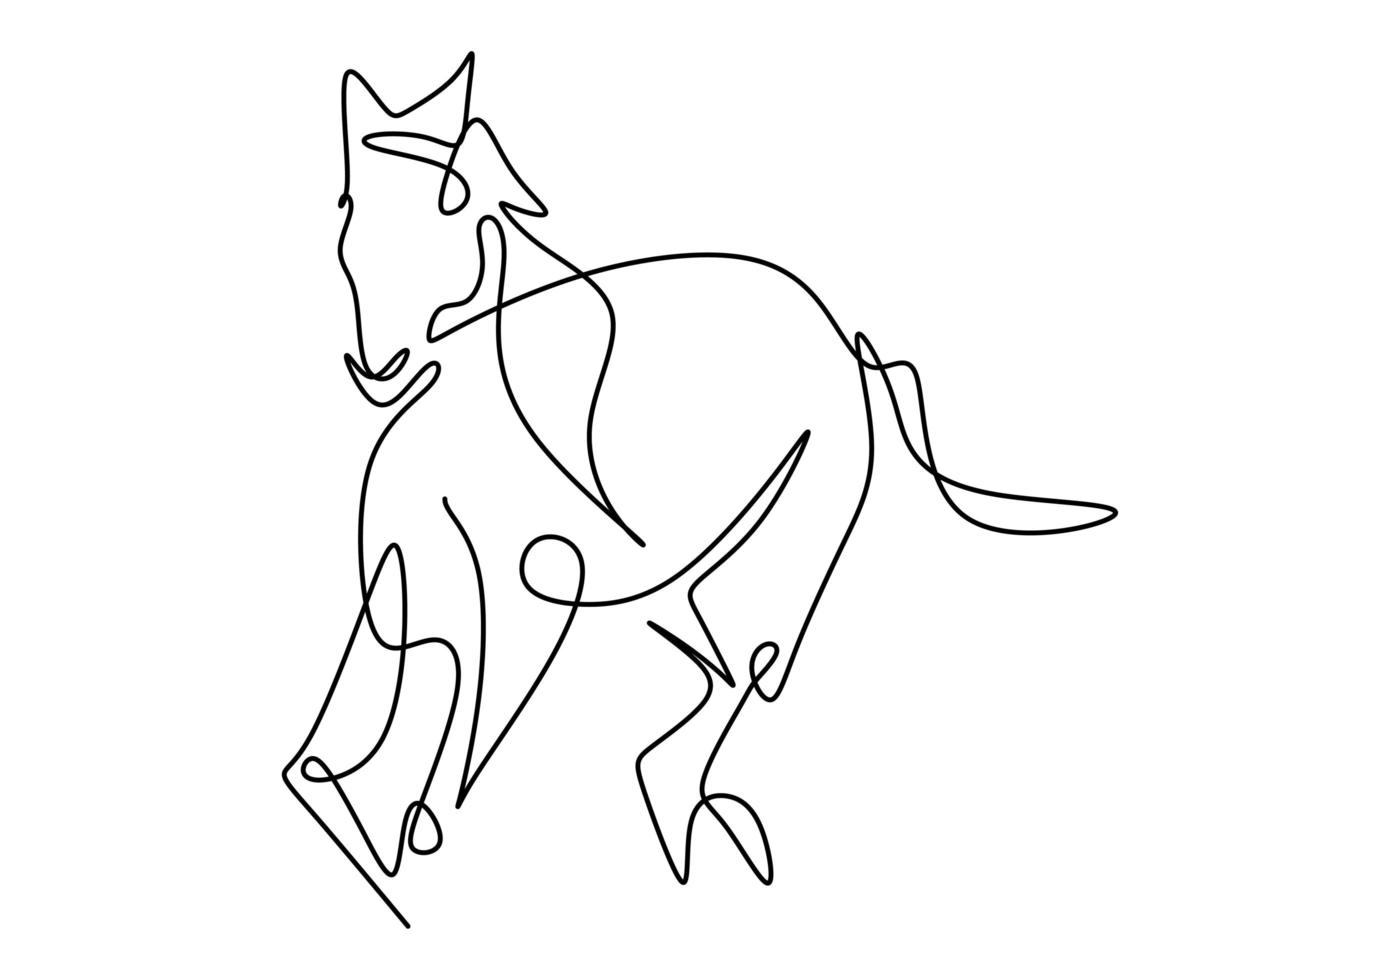 One single line drawing of elegance horse company logo identity. Running horse. Pony horse mammal animal symbol concept. Continuous one line single vector